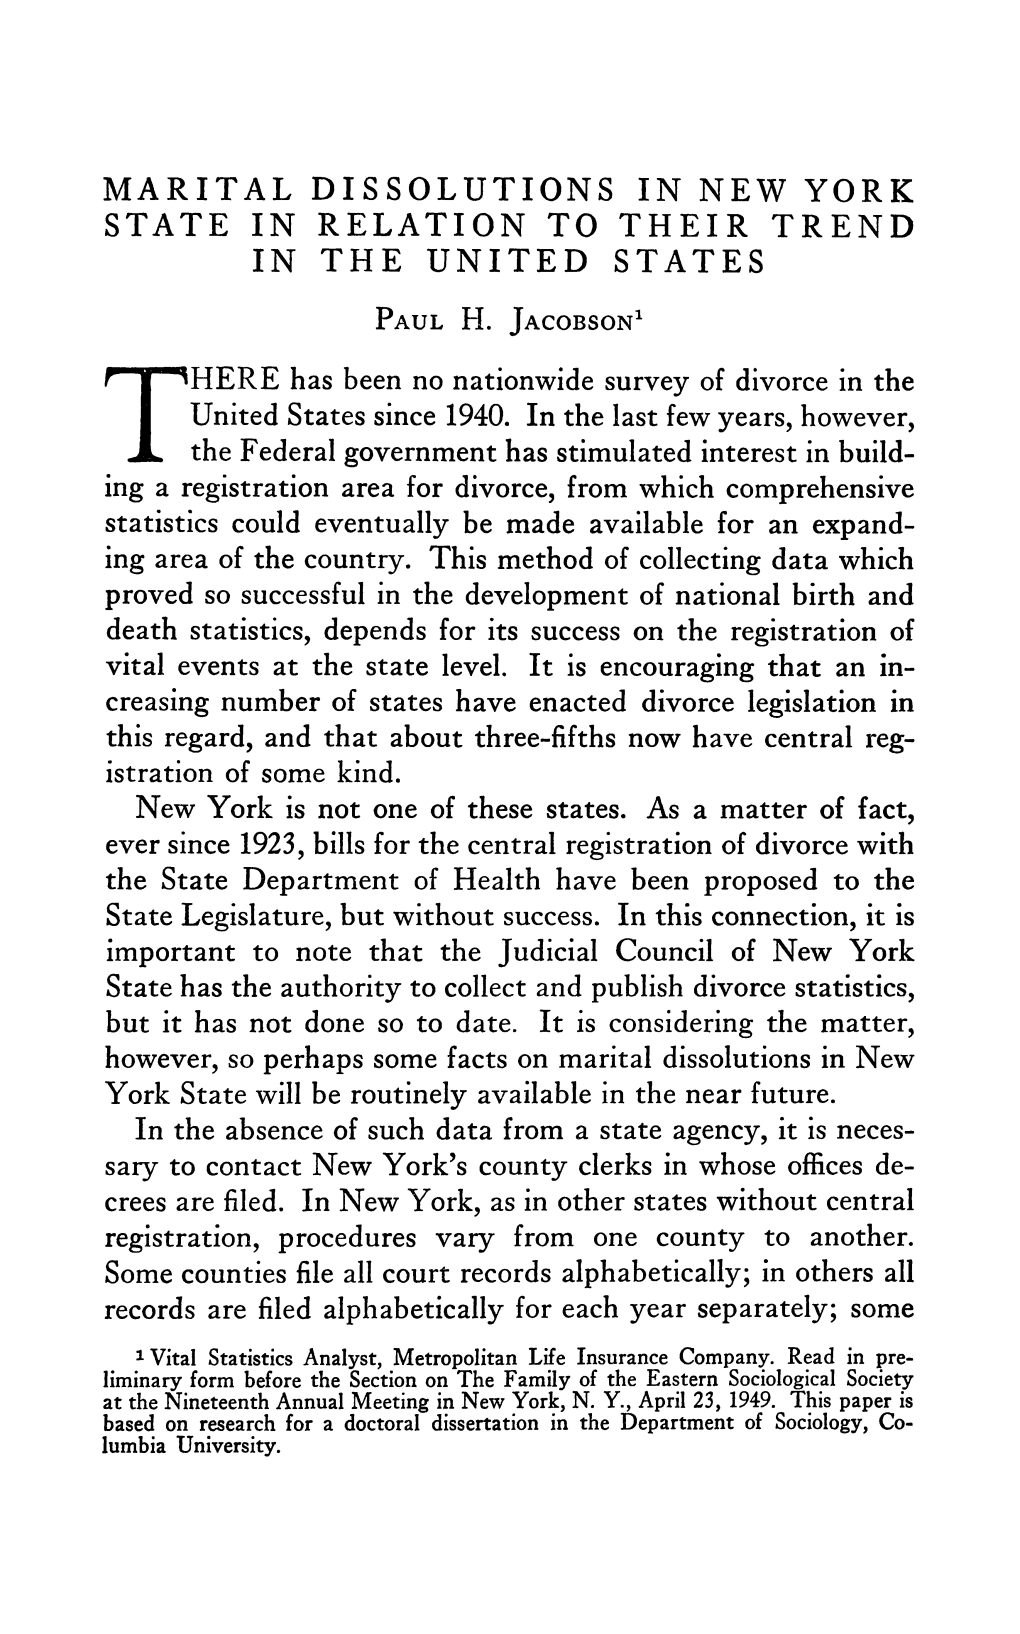 Marital Dissolutions in New York State in Relation to Their Trend in the United States